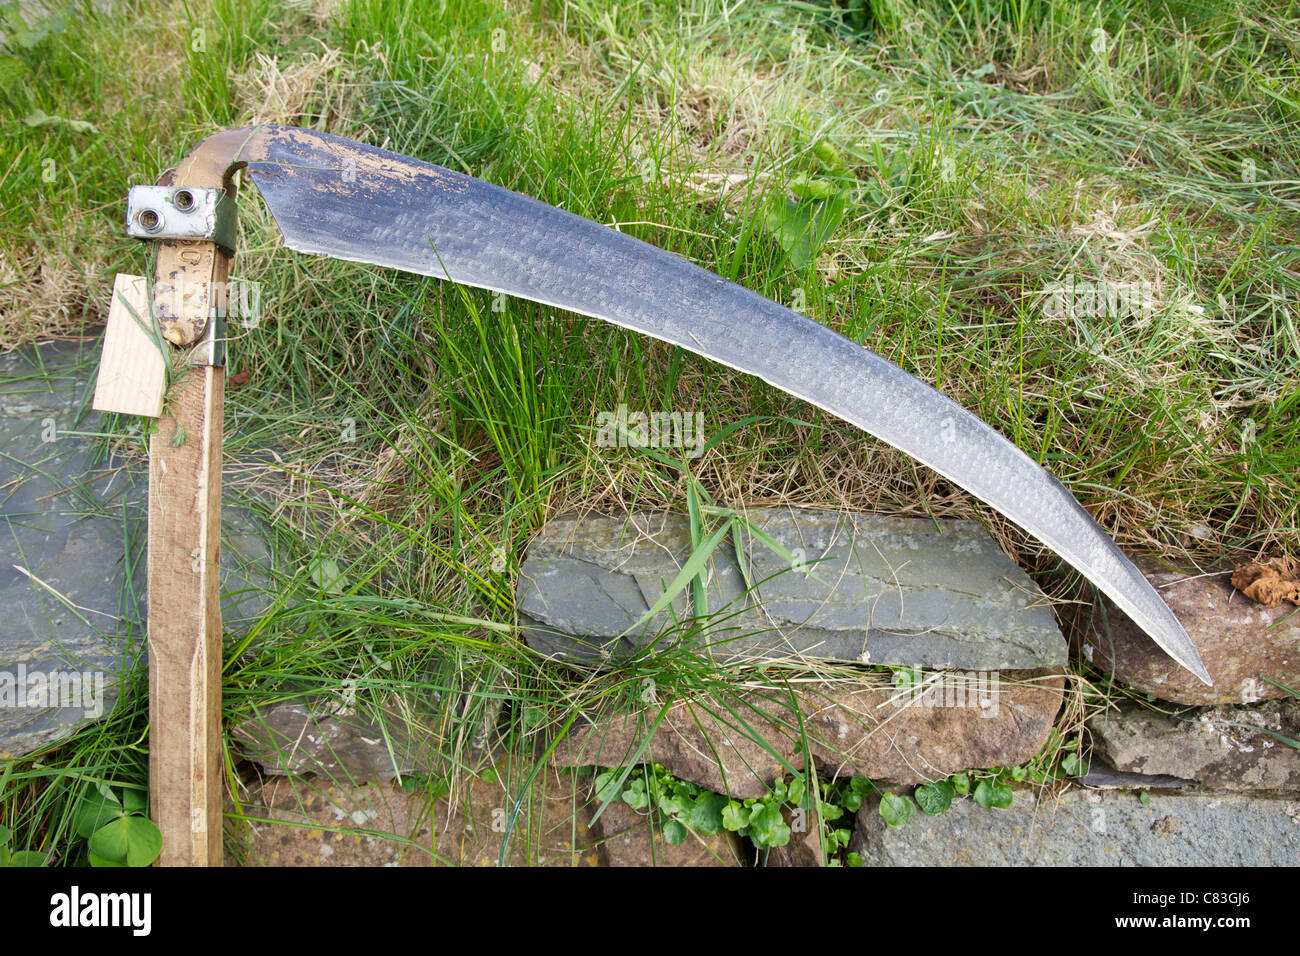 Scythe blade showing wedge used to change the angle of the blade Stock Photo